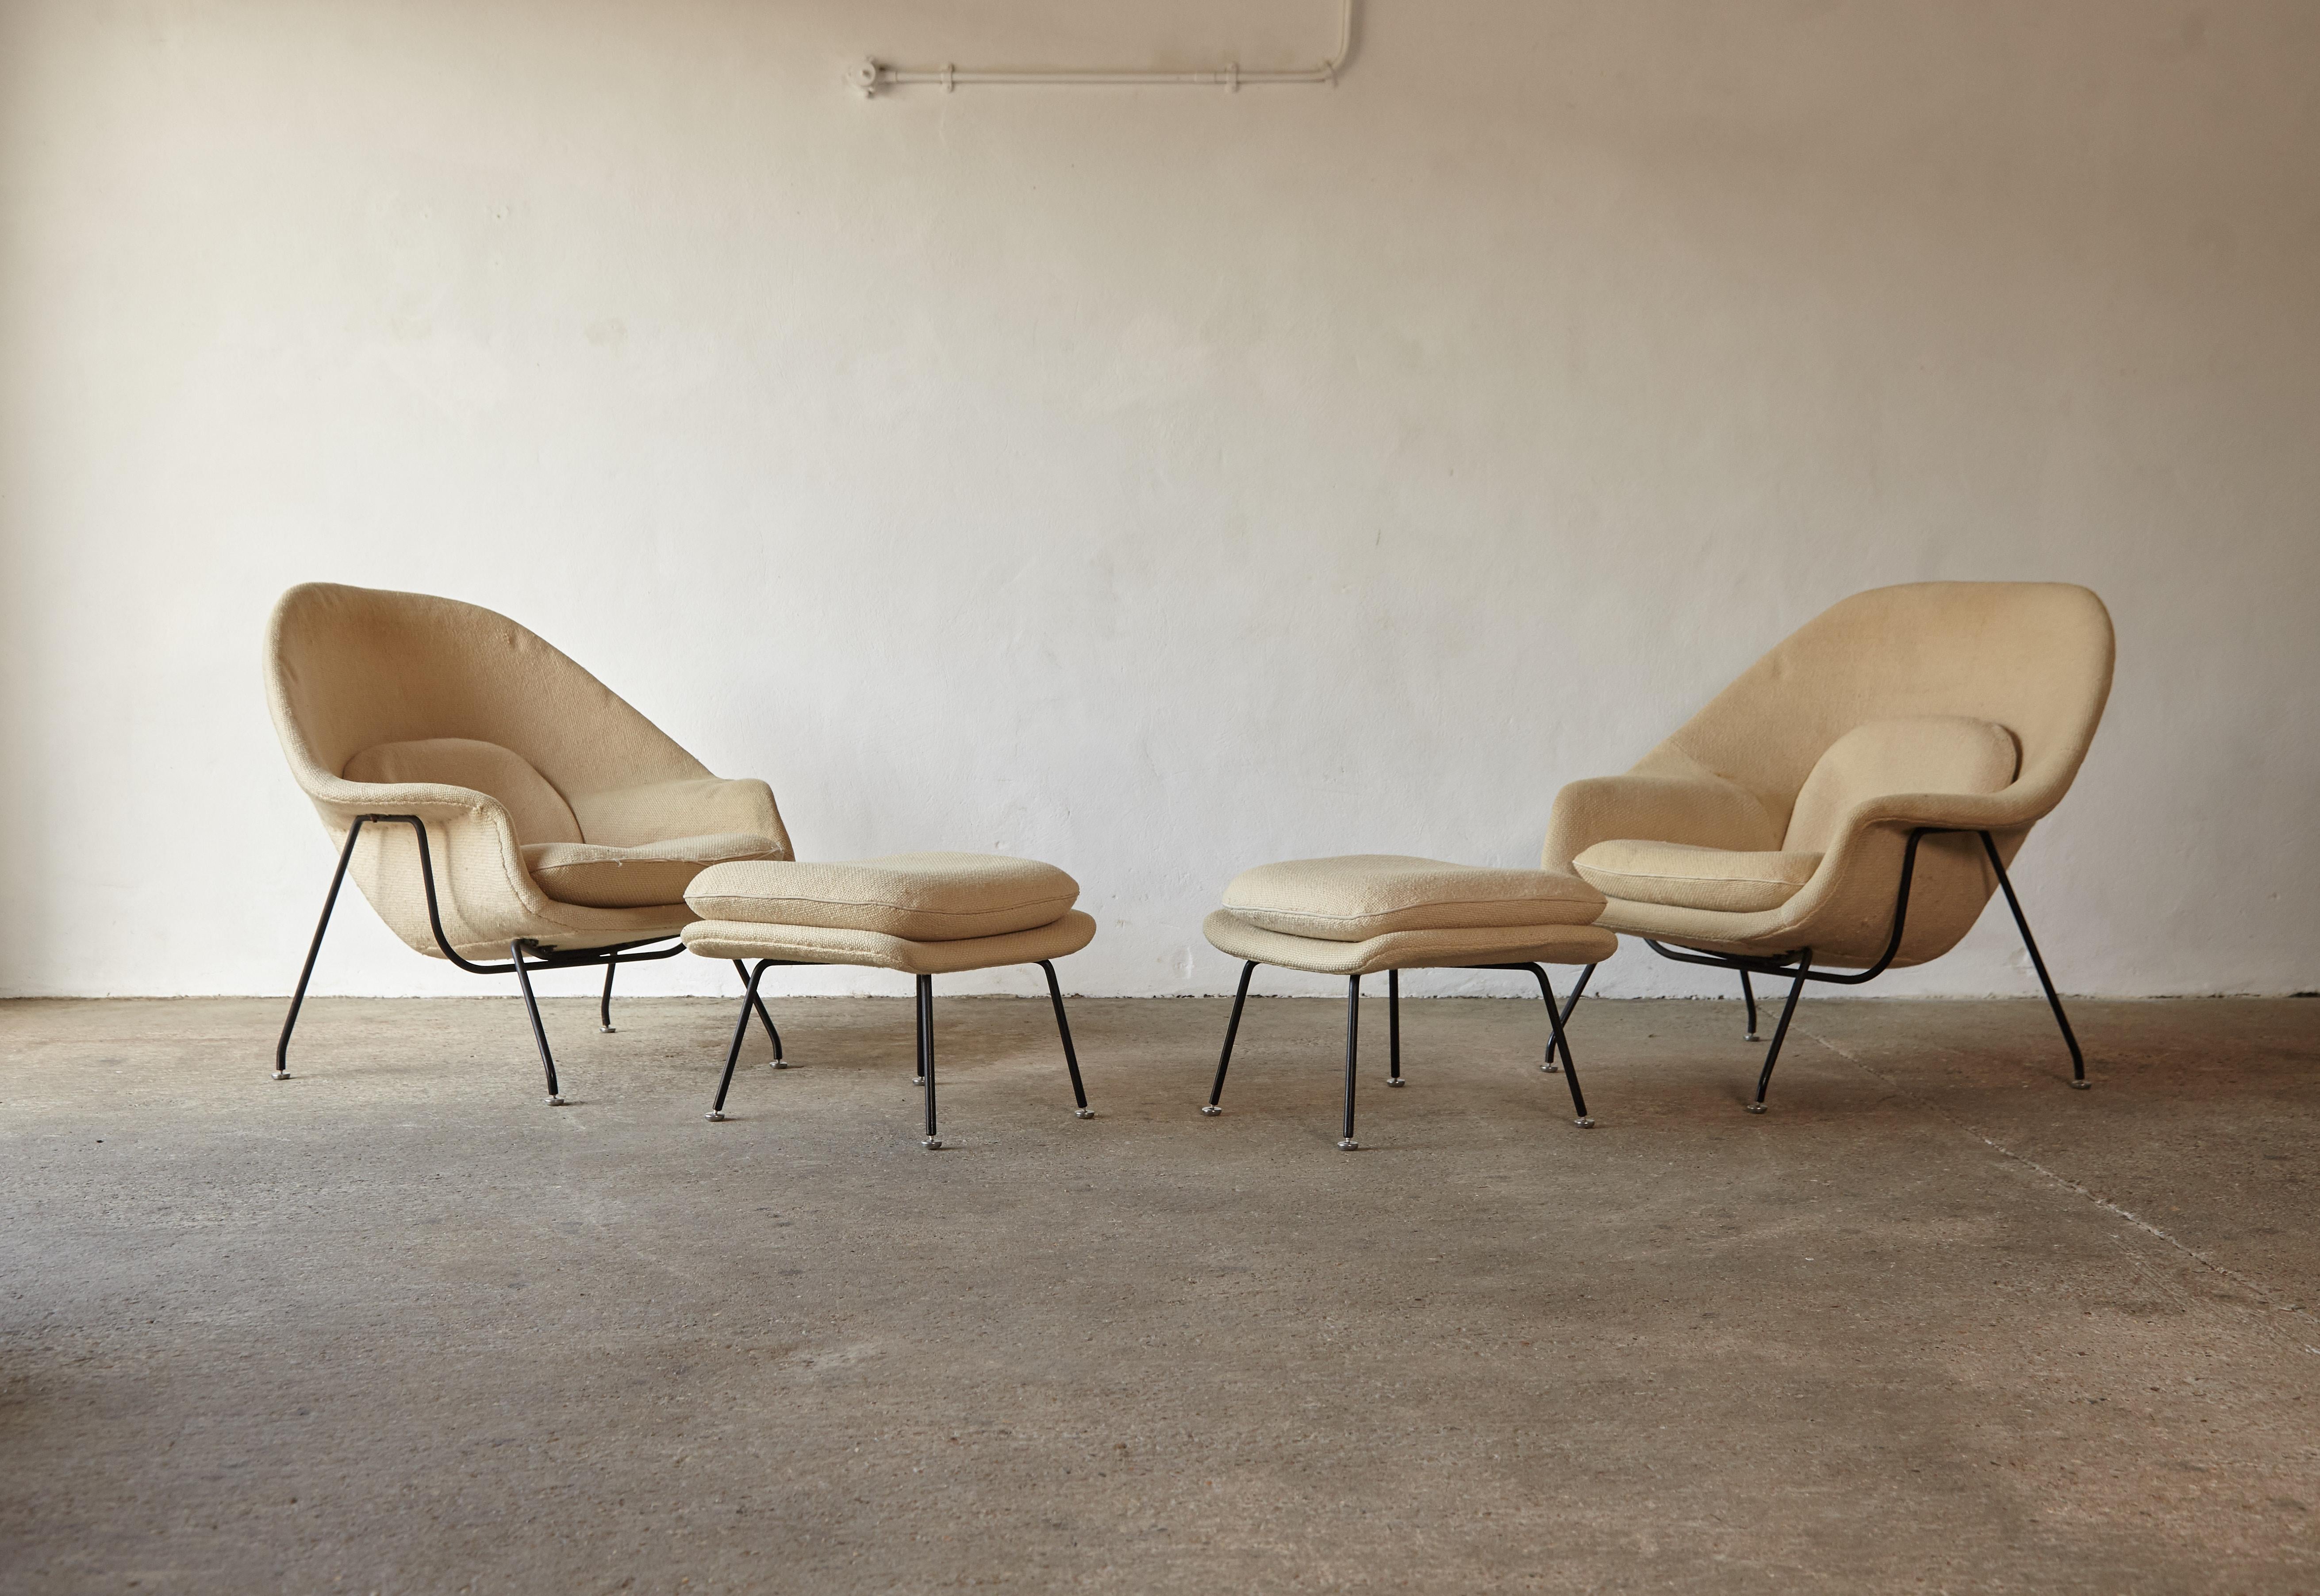 Mid-Century Modern Rare Early Pair of Eero Saarinen Womb Chairs and Ottomans, Knoll, USA, 1950s For Sale